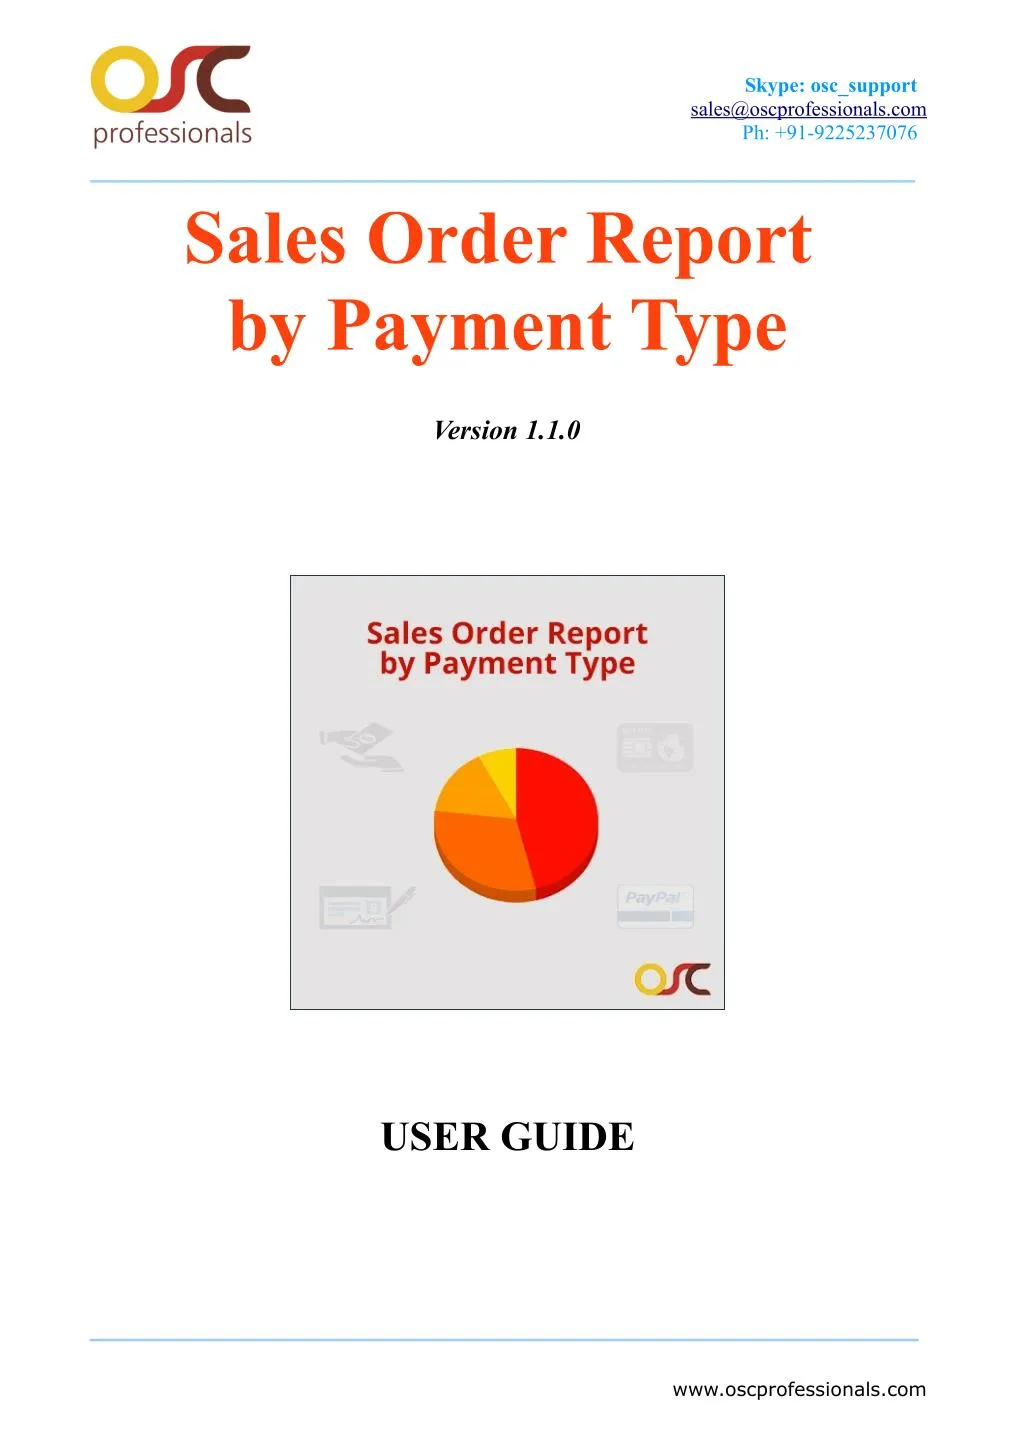 skype osc support sales@oscprofessionals